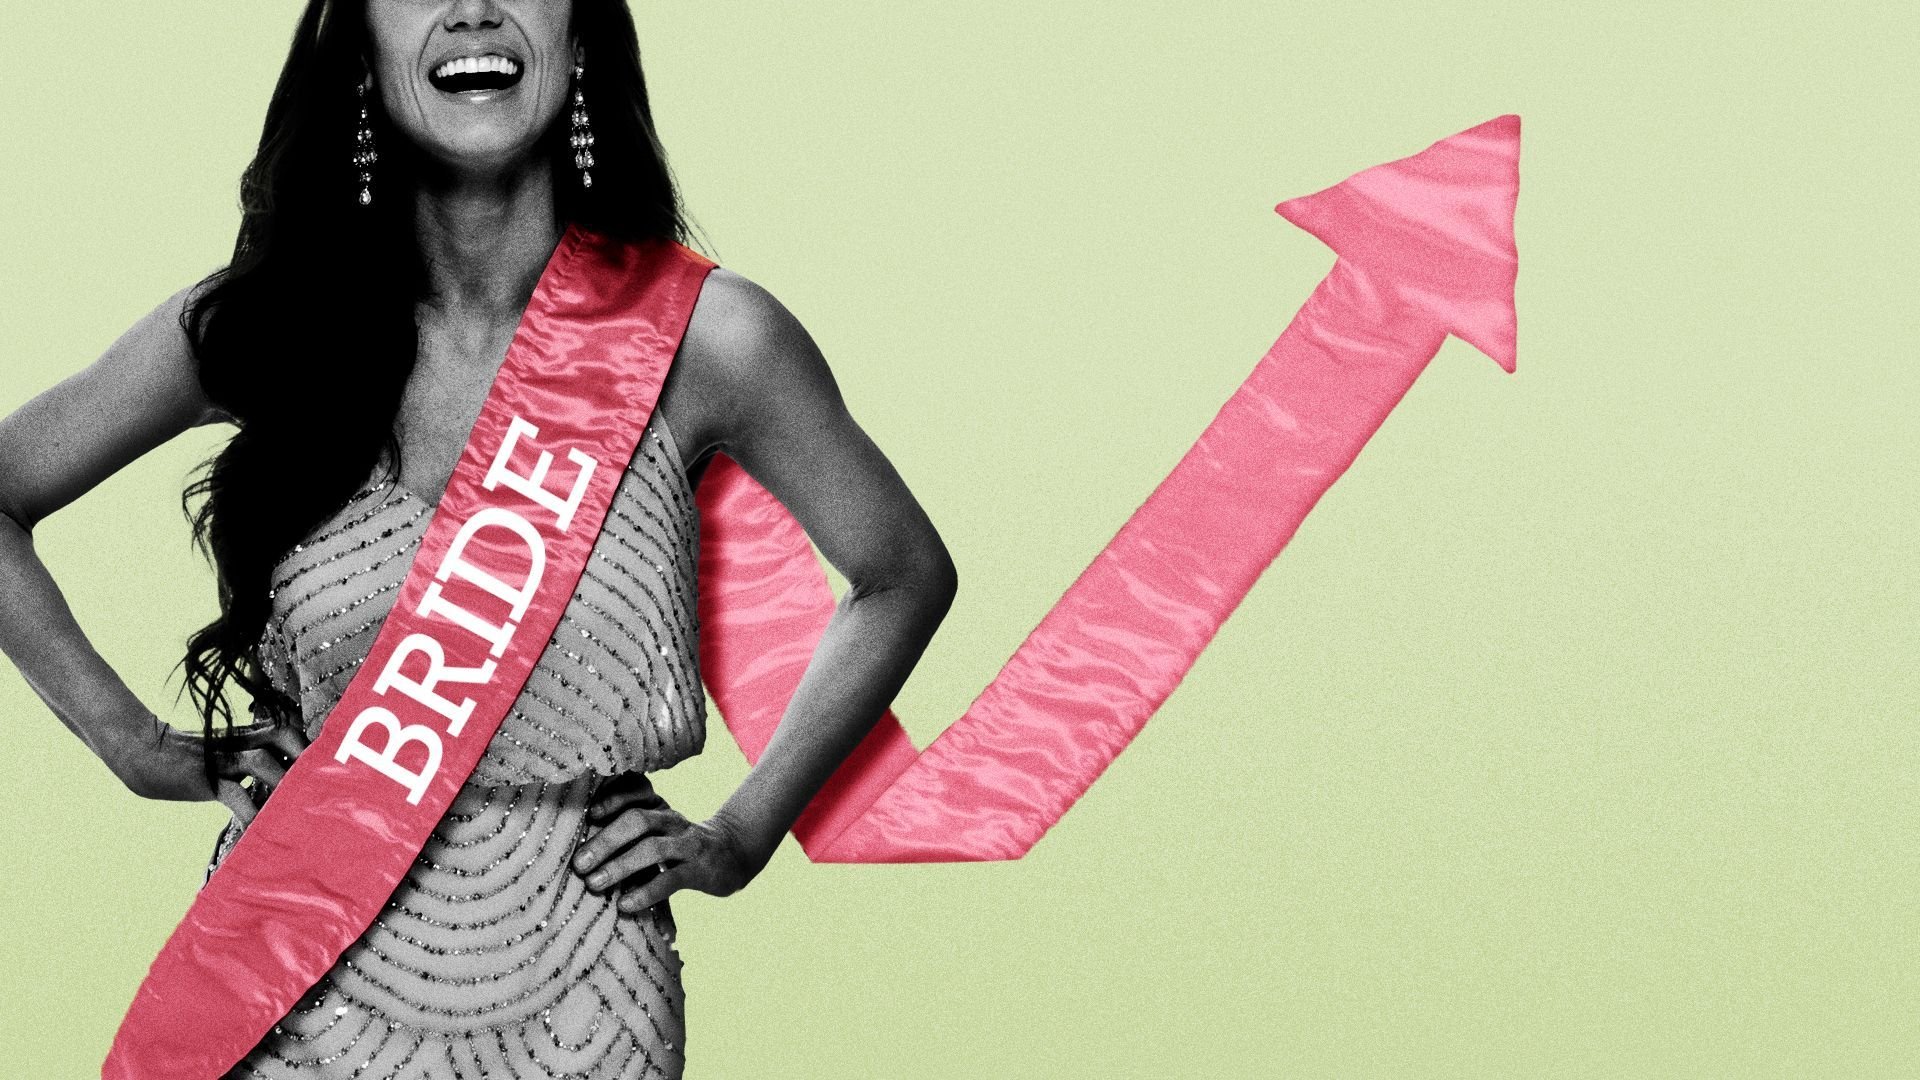 Bachelorette parties are breaking the bank